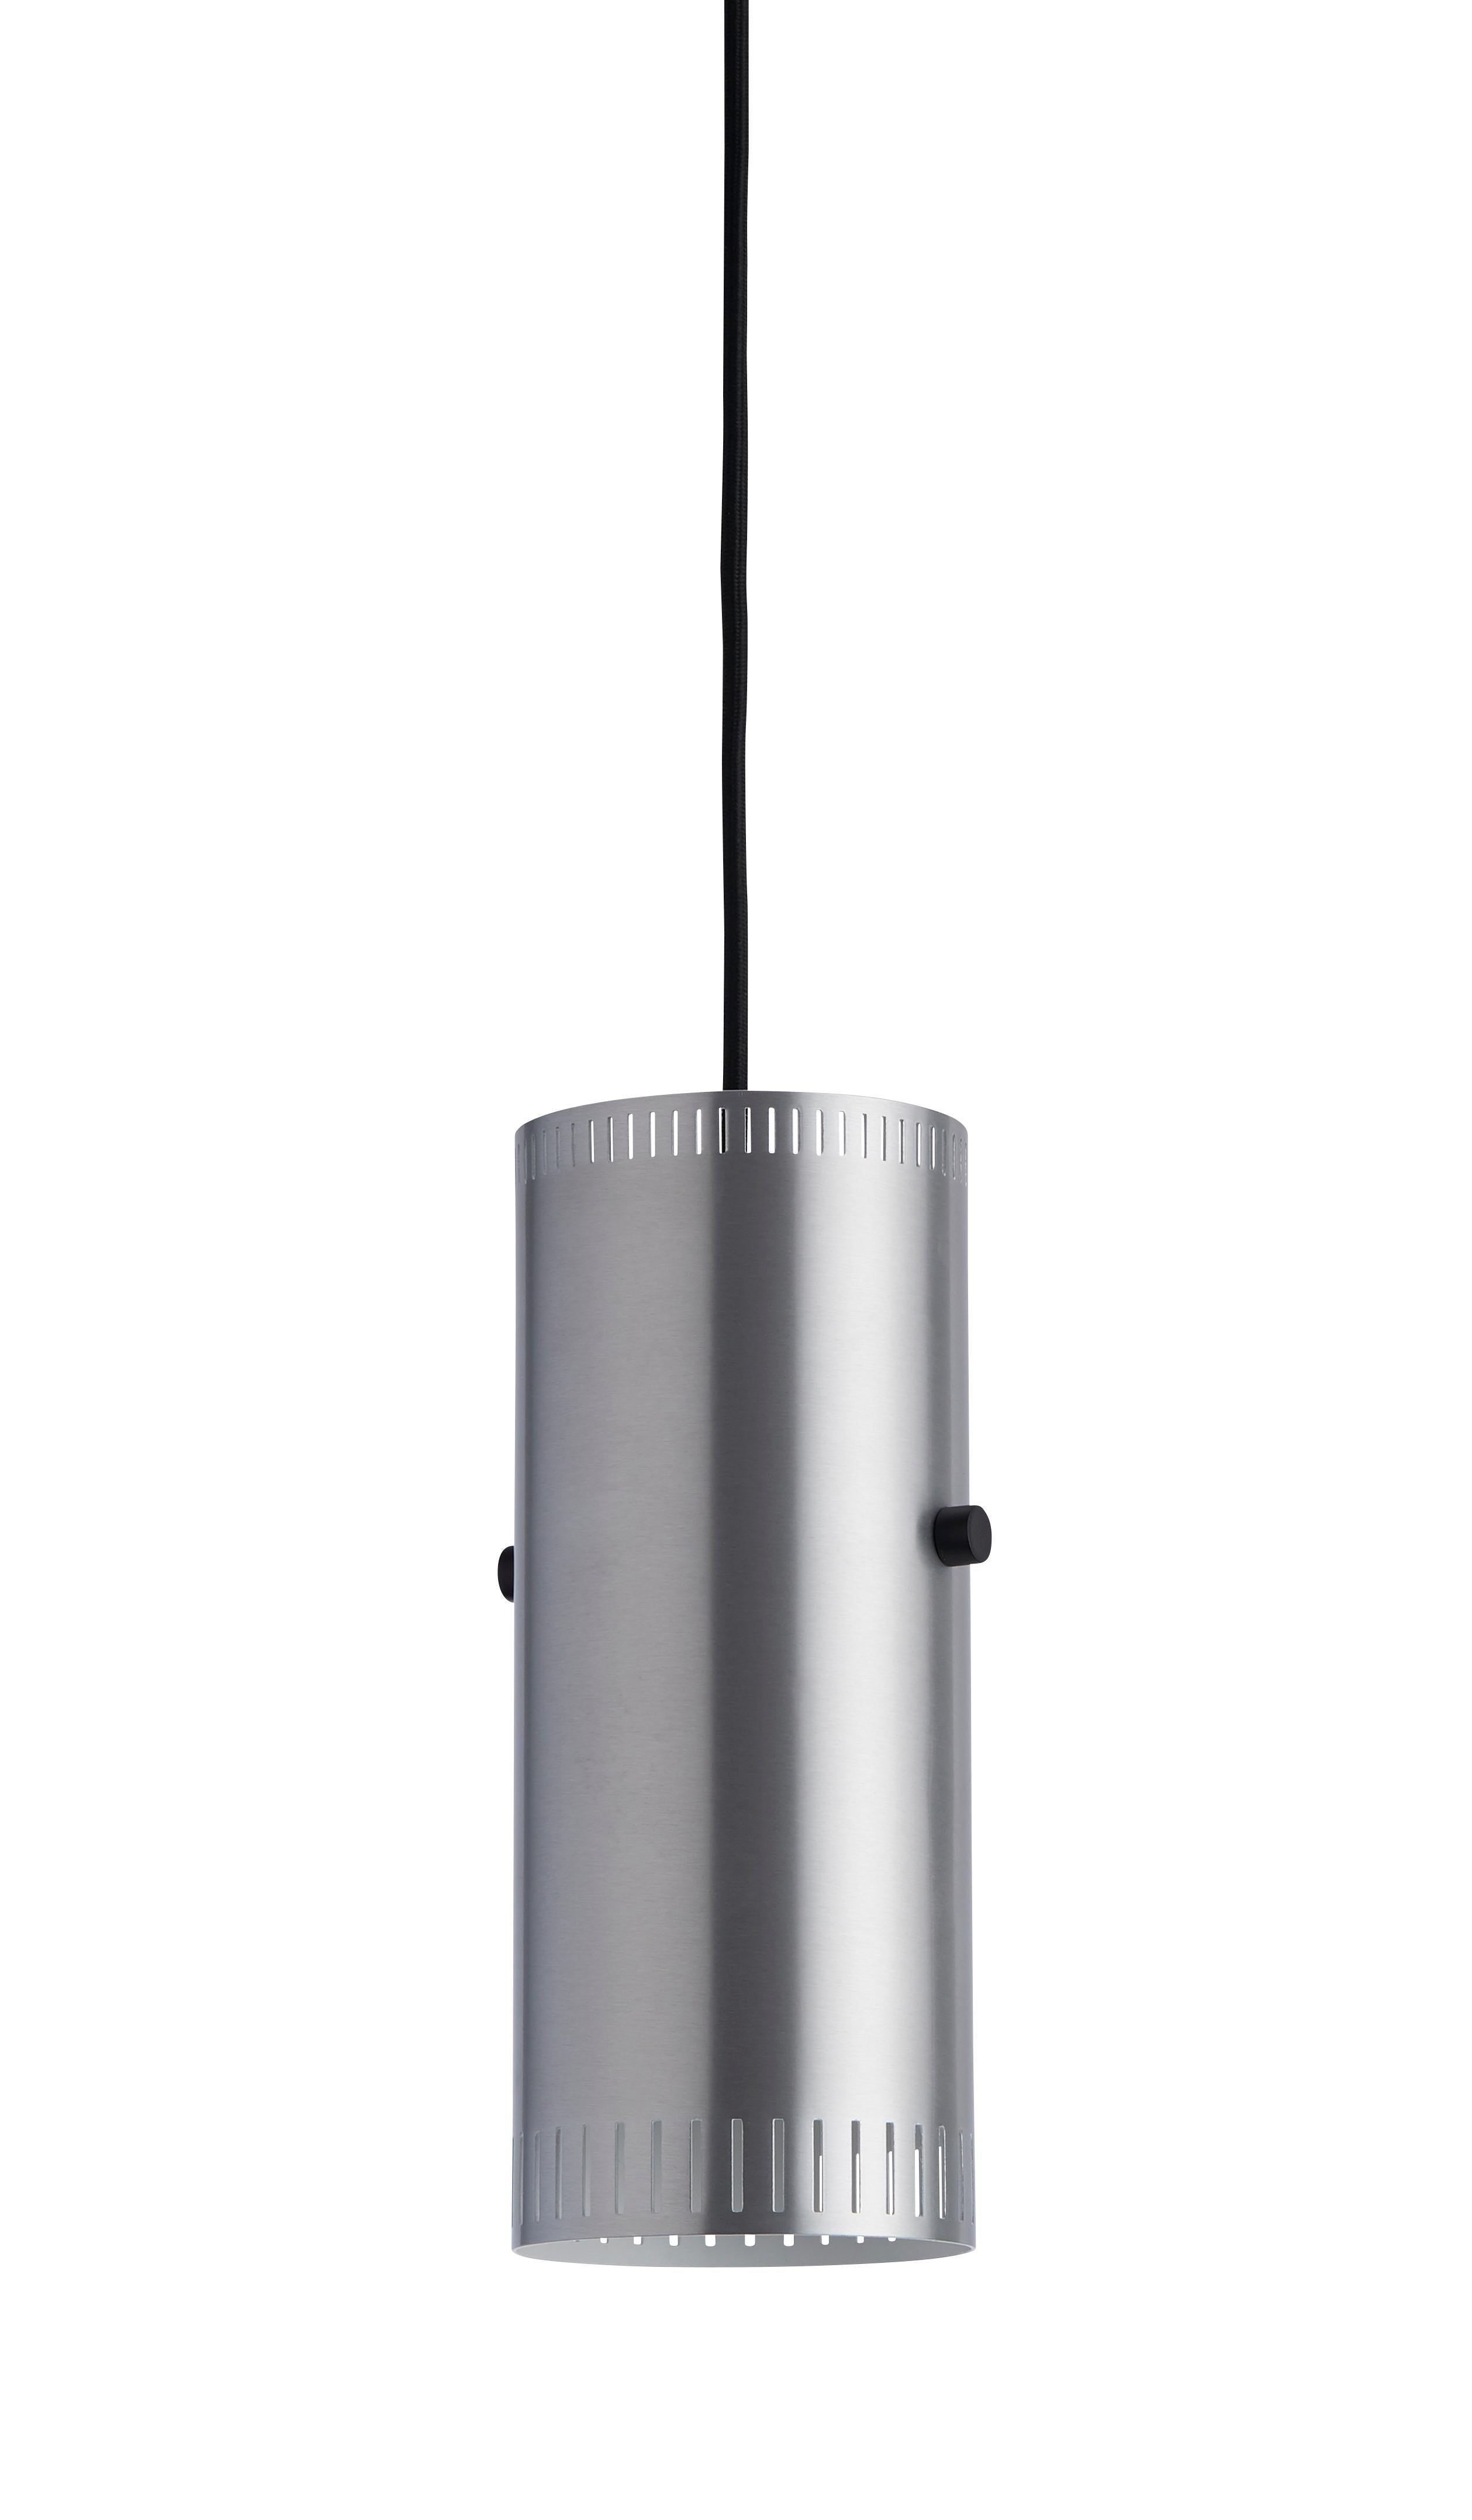 Trombone Aluminium Pendant by Warm Nordic
Dimensions: D10 x H25 cm
Material: Brushed aluminium
Weight: 1 kg
Also available in different finishes. Please contact us.

Warm Nordic is an ambitious design brand anchored in Nordic design history